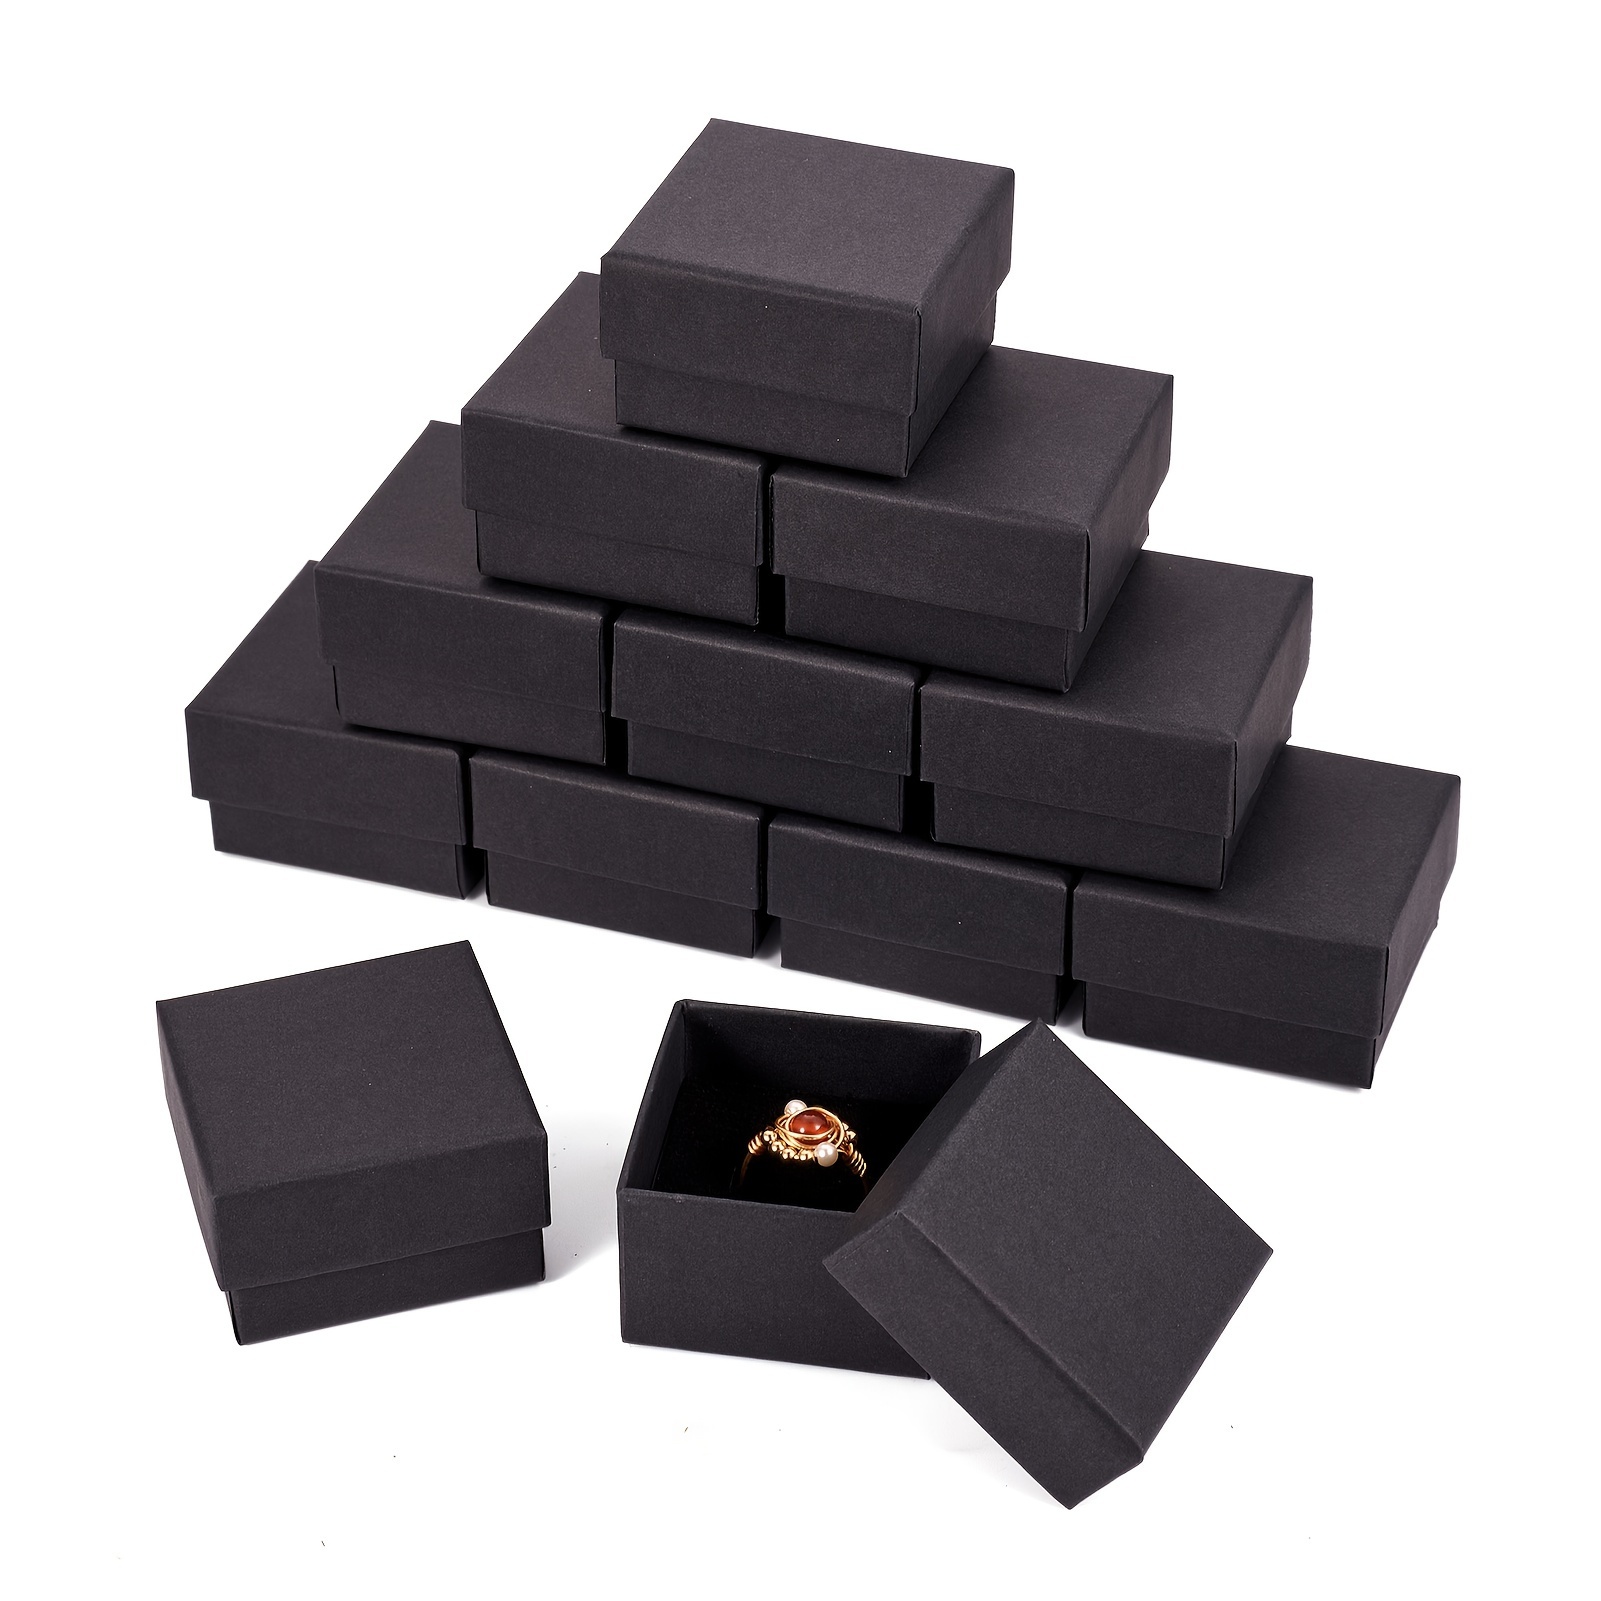 

24pcs Kraft Paper Cardboard Jewelry Ring Square Boxes With Sponge Inside, Upscale Black 5.1x5.1x3.2cm Valentine's Day Gifts Display Package Storage Retail Supplies